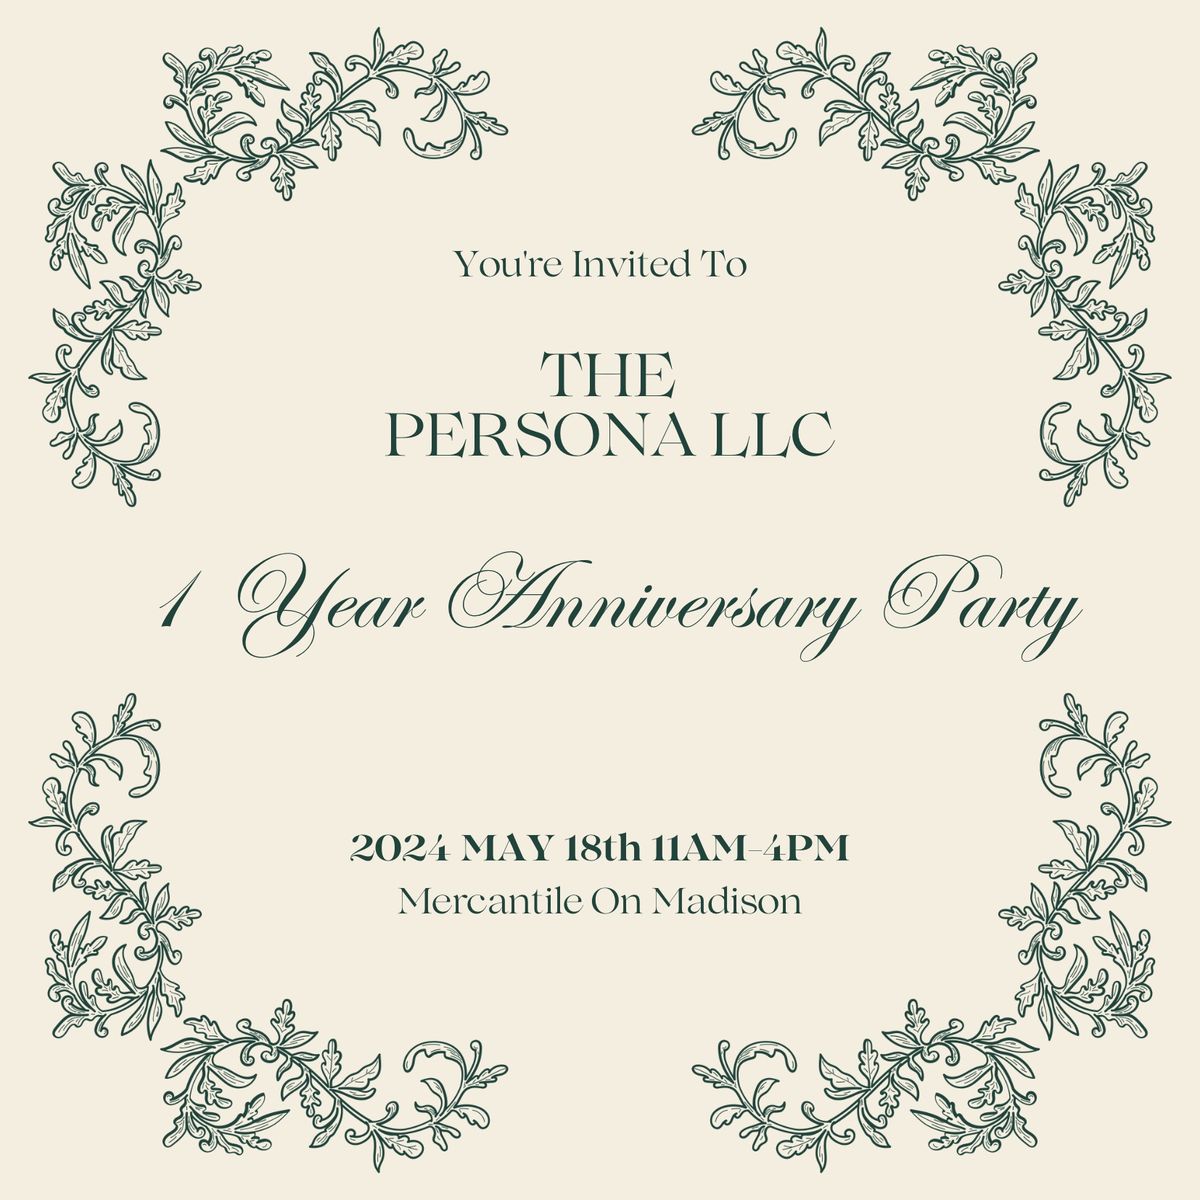 The Persona LLC 1 Year Anniversary Party